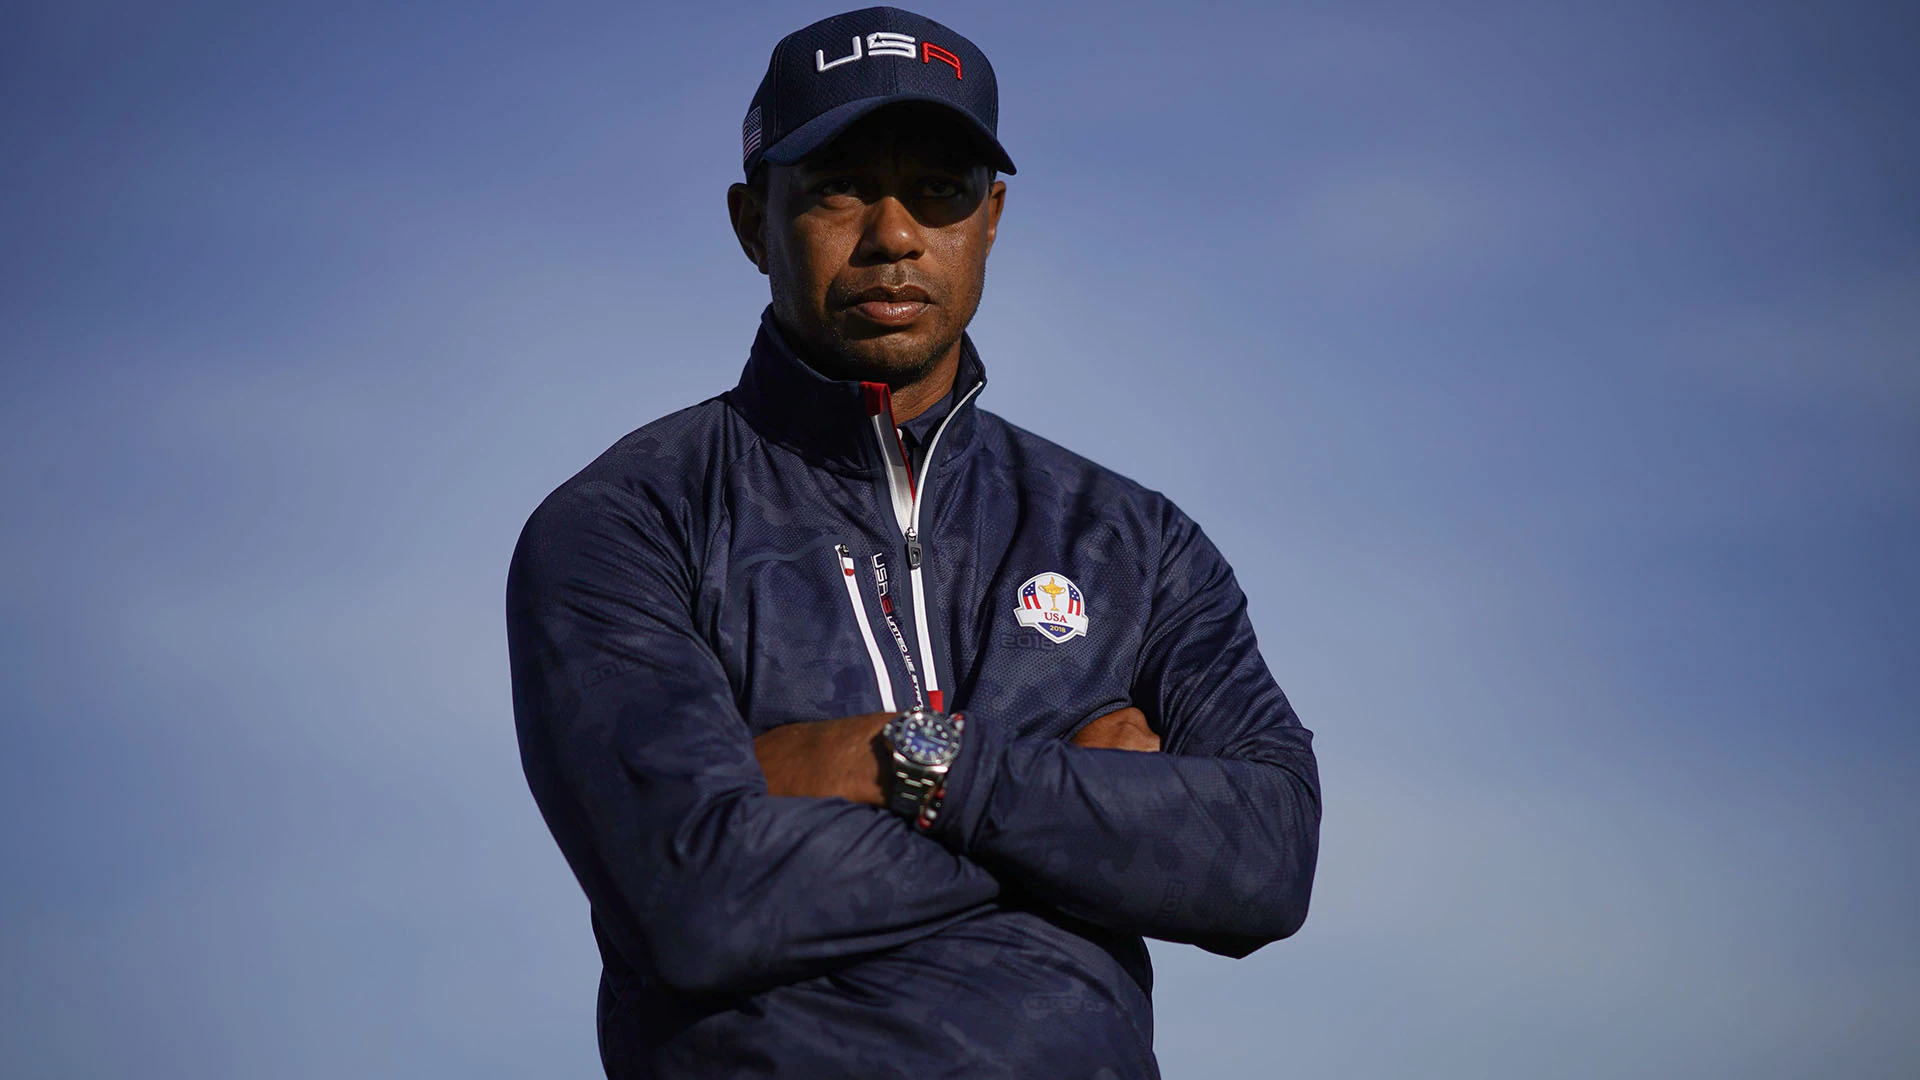 How Tiger Woods is playing a role for Team USA at this Ryder Cup